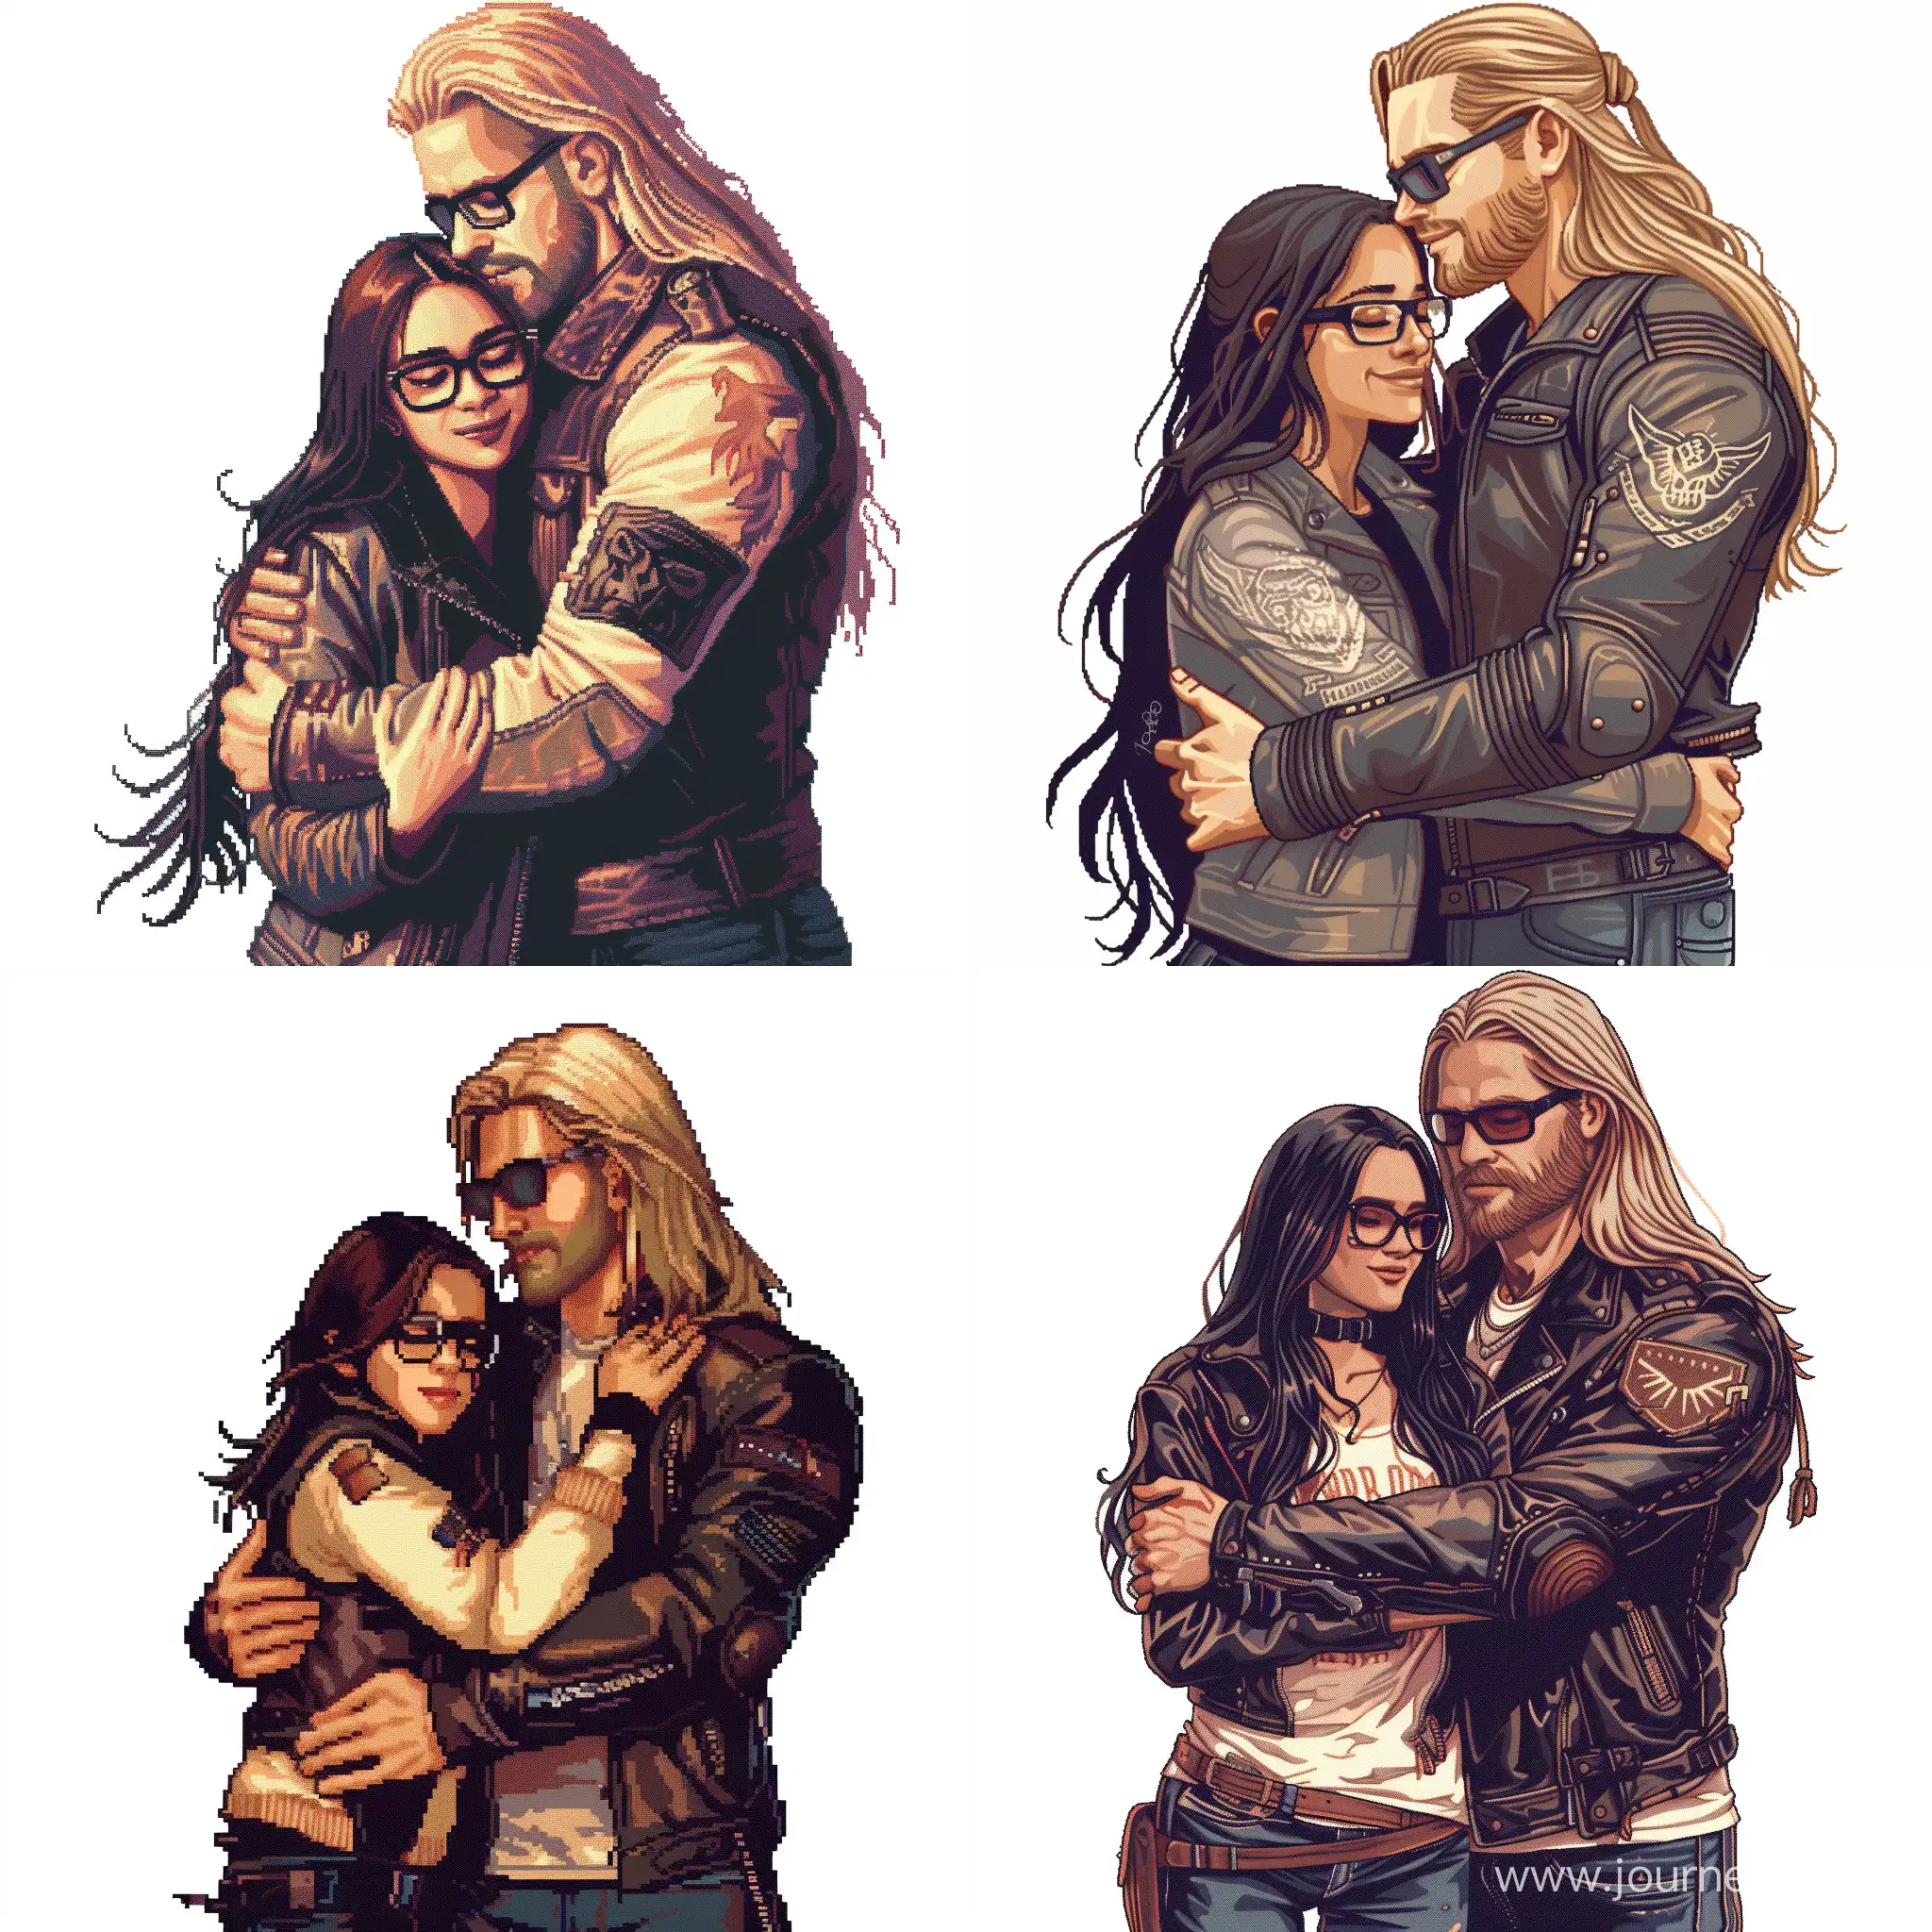 Draw in high detailed cyberpunk pixel art style. Short white girl with long dark hair in glasses hugging with tall white man with long blond hairs in a leather motorcycle jacket.